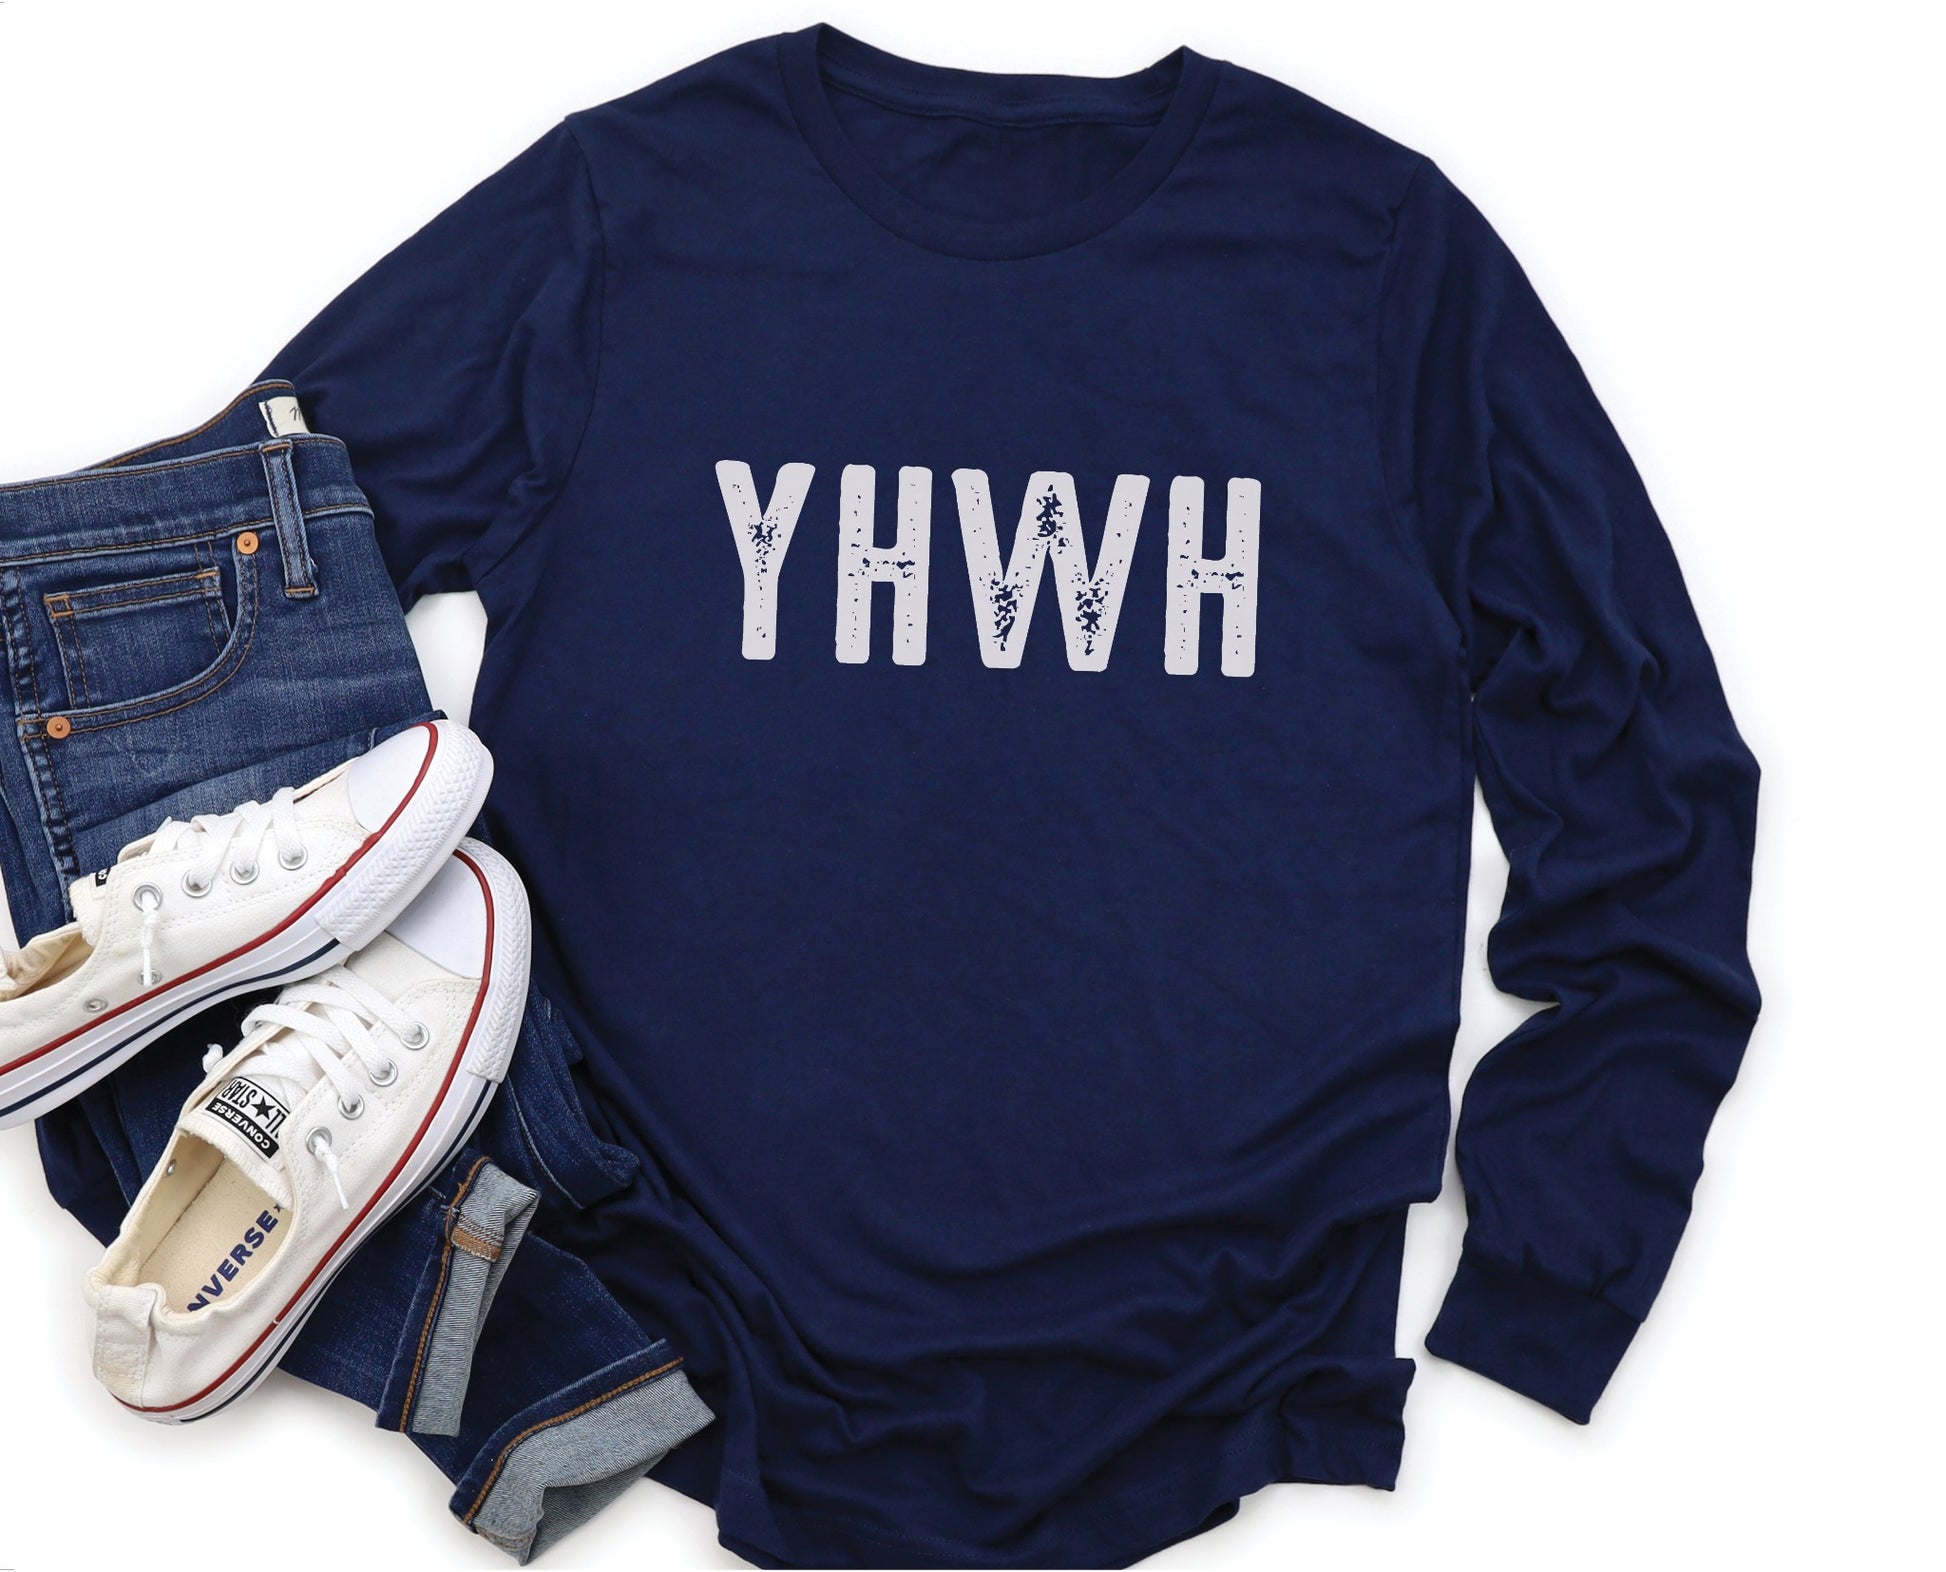 YHWH Hebrew Biblical Name of God Yahweh Christian aesthetic design printed in white distressed lettering on soft navy blue long sleeve tee for men and women